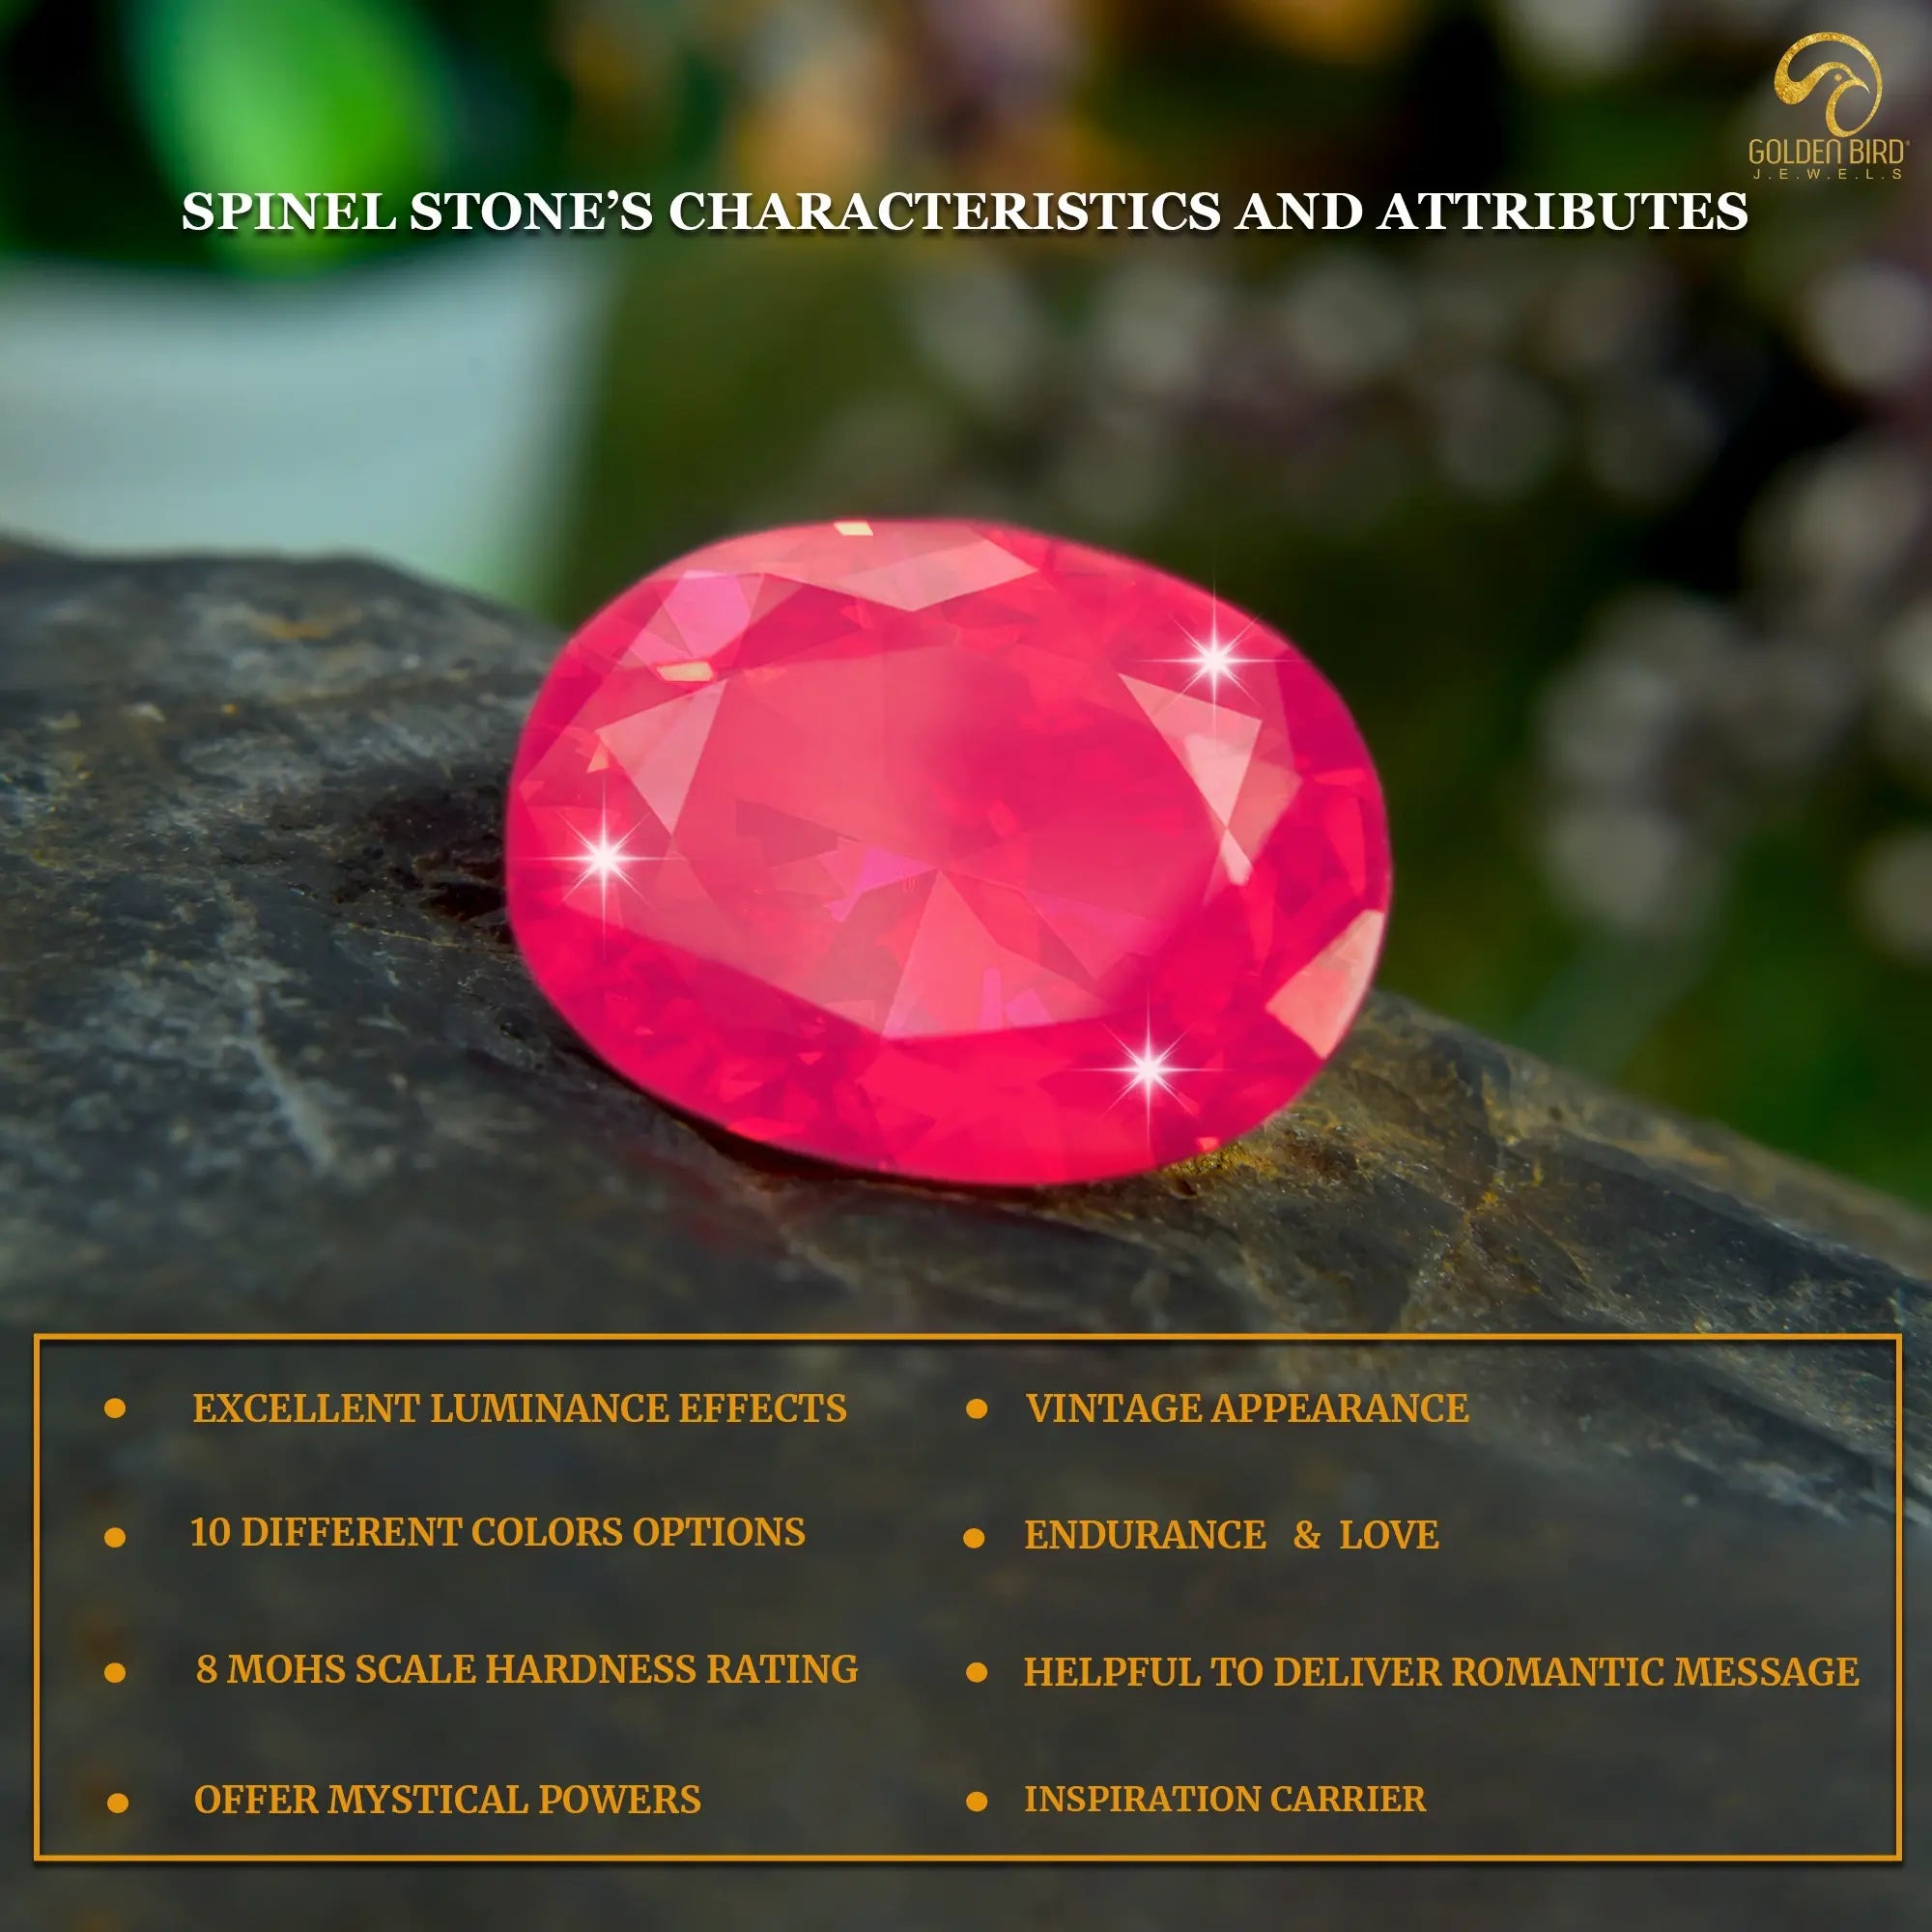 Attributes and characteristics of August month's spinel birthstone